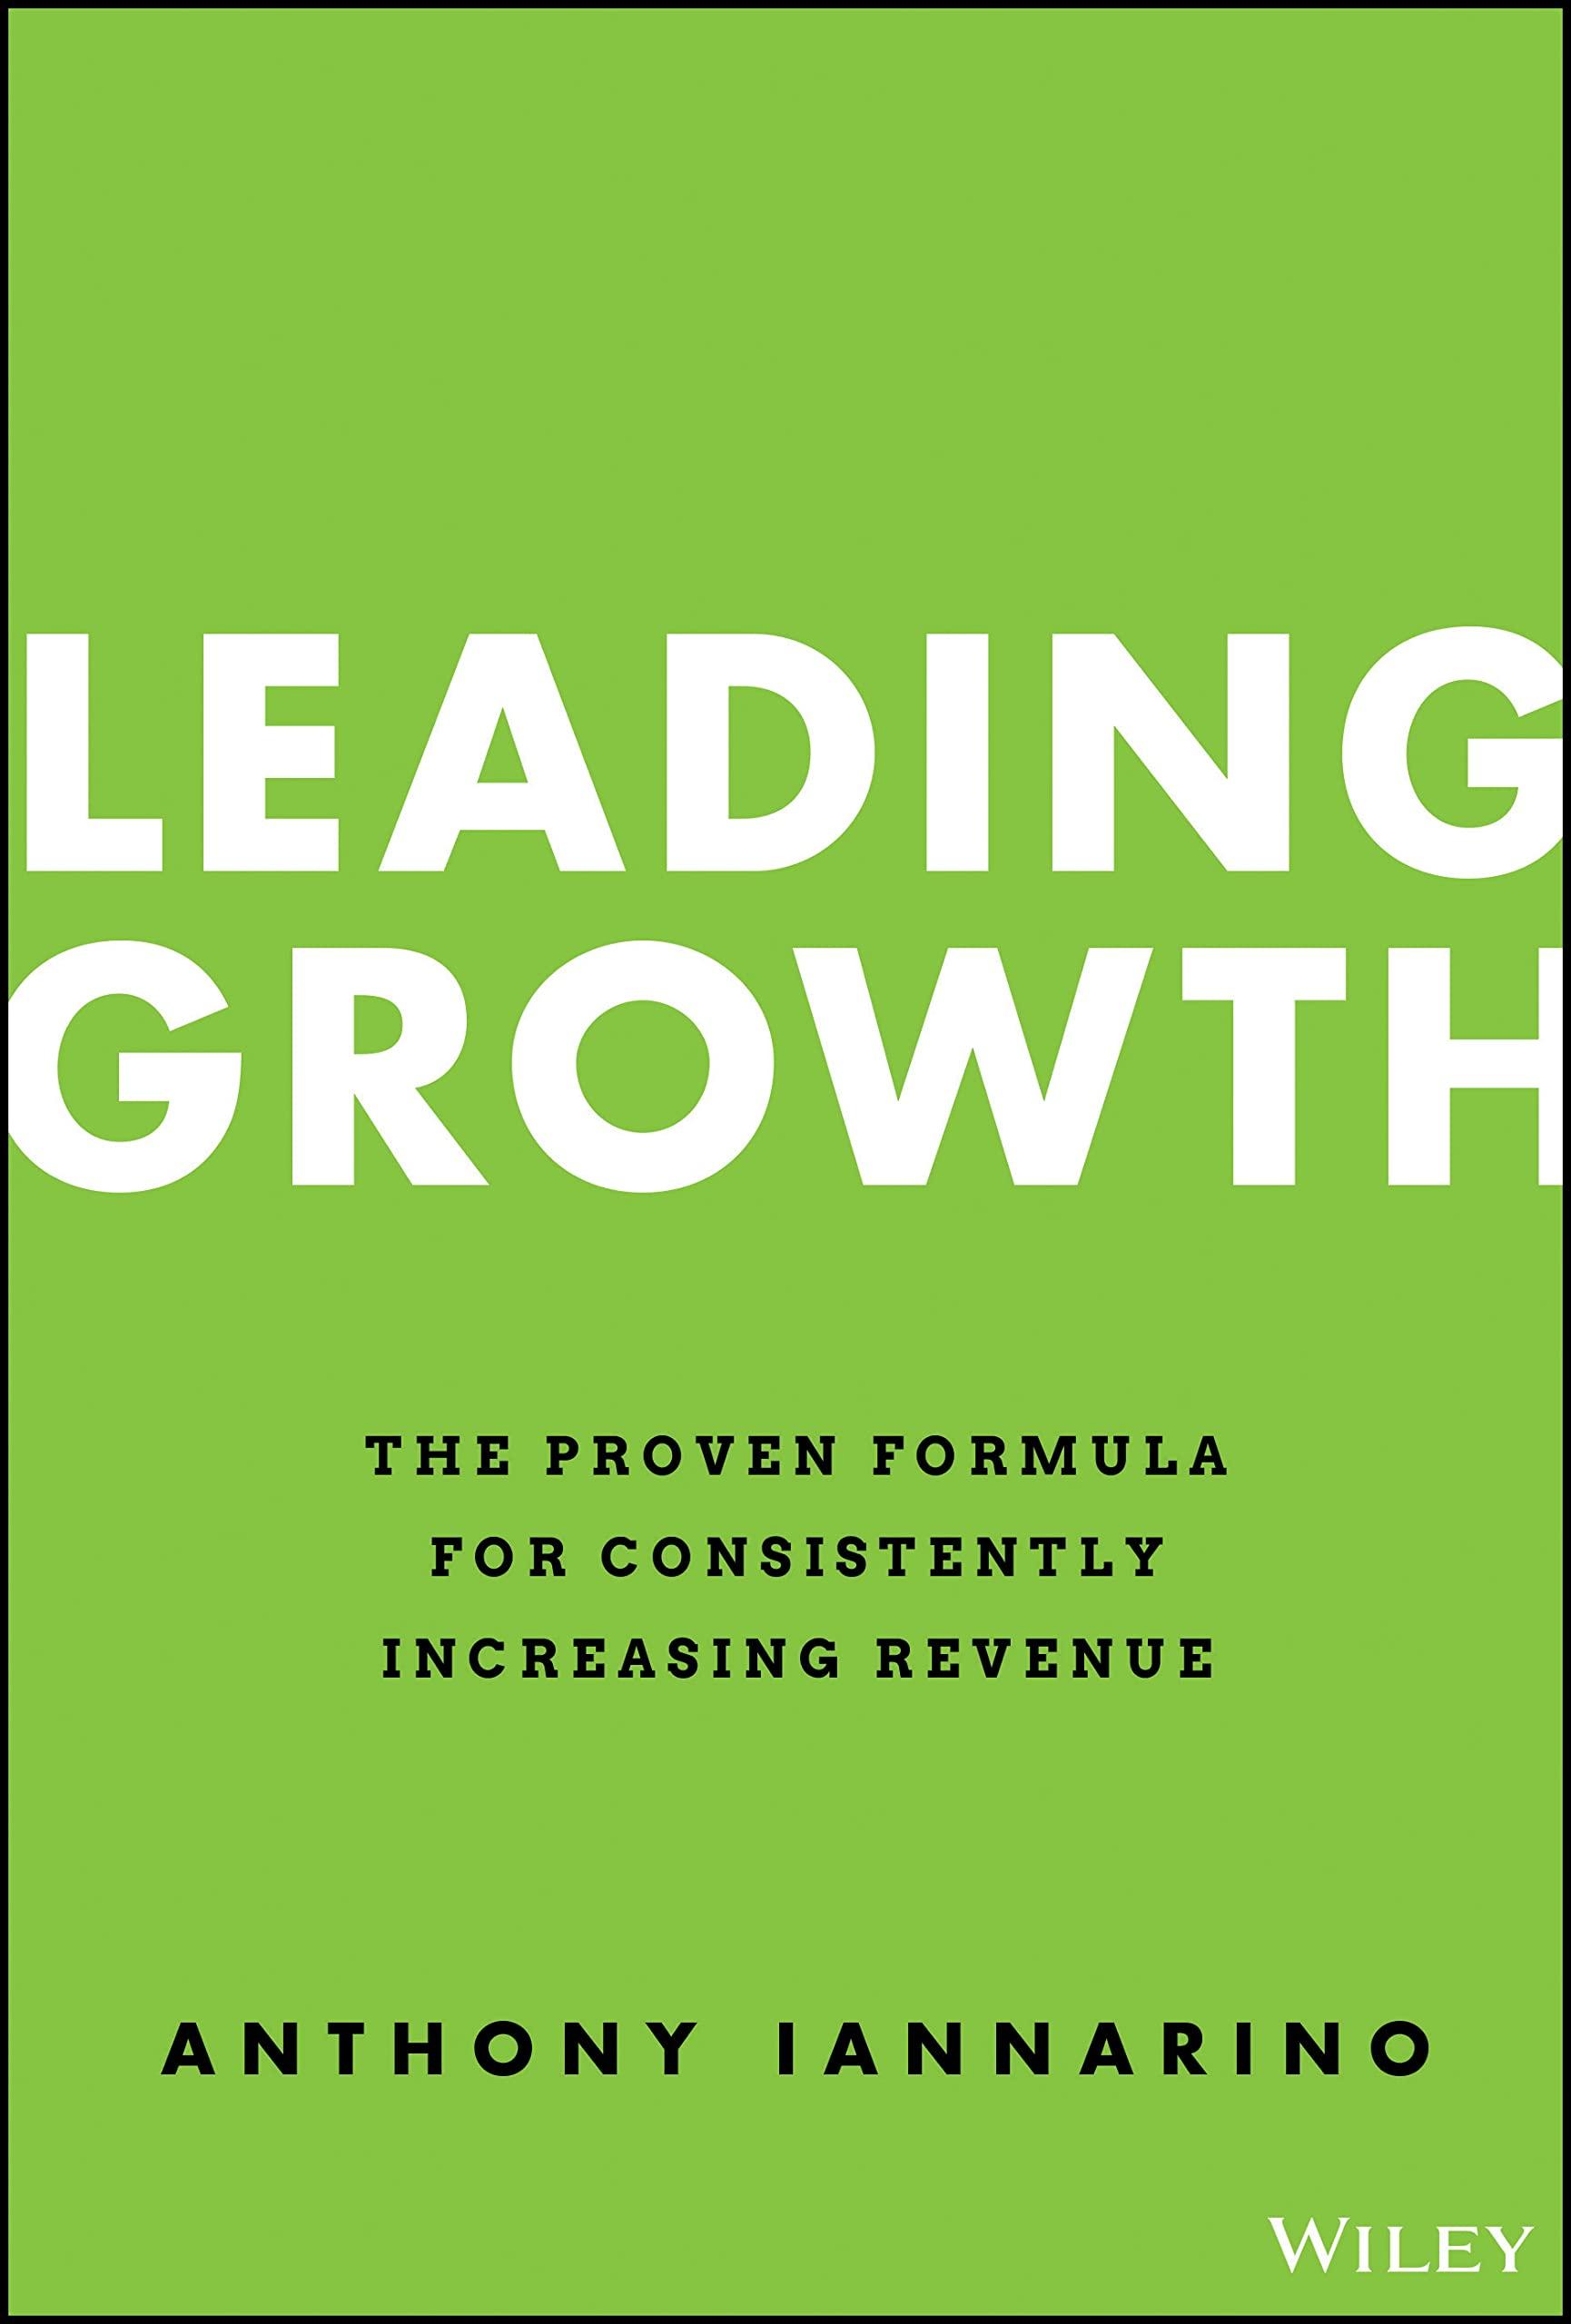 Leading Growth The Proven Formula For Consistently Increasing Revenue